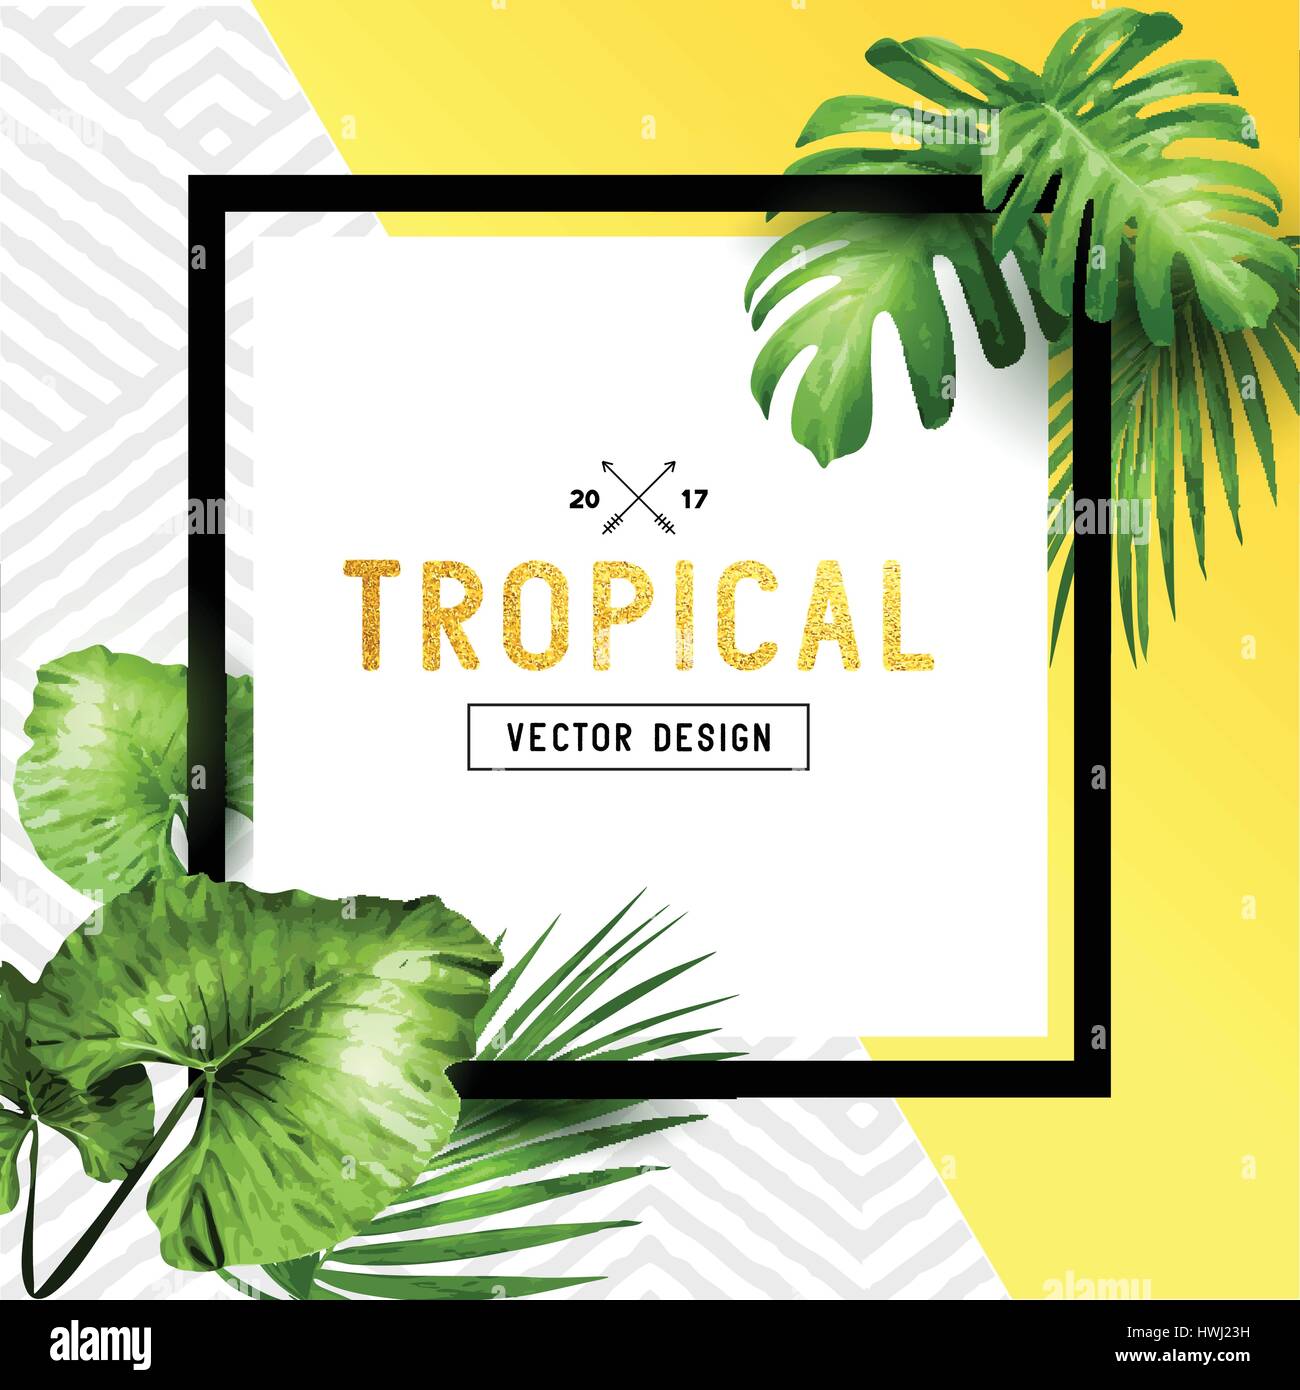 Exotic tropical summer frame with palm leaves and patterned background. Vector illustration Stock Vector